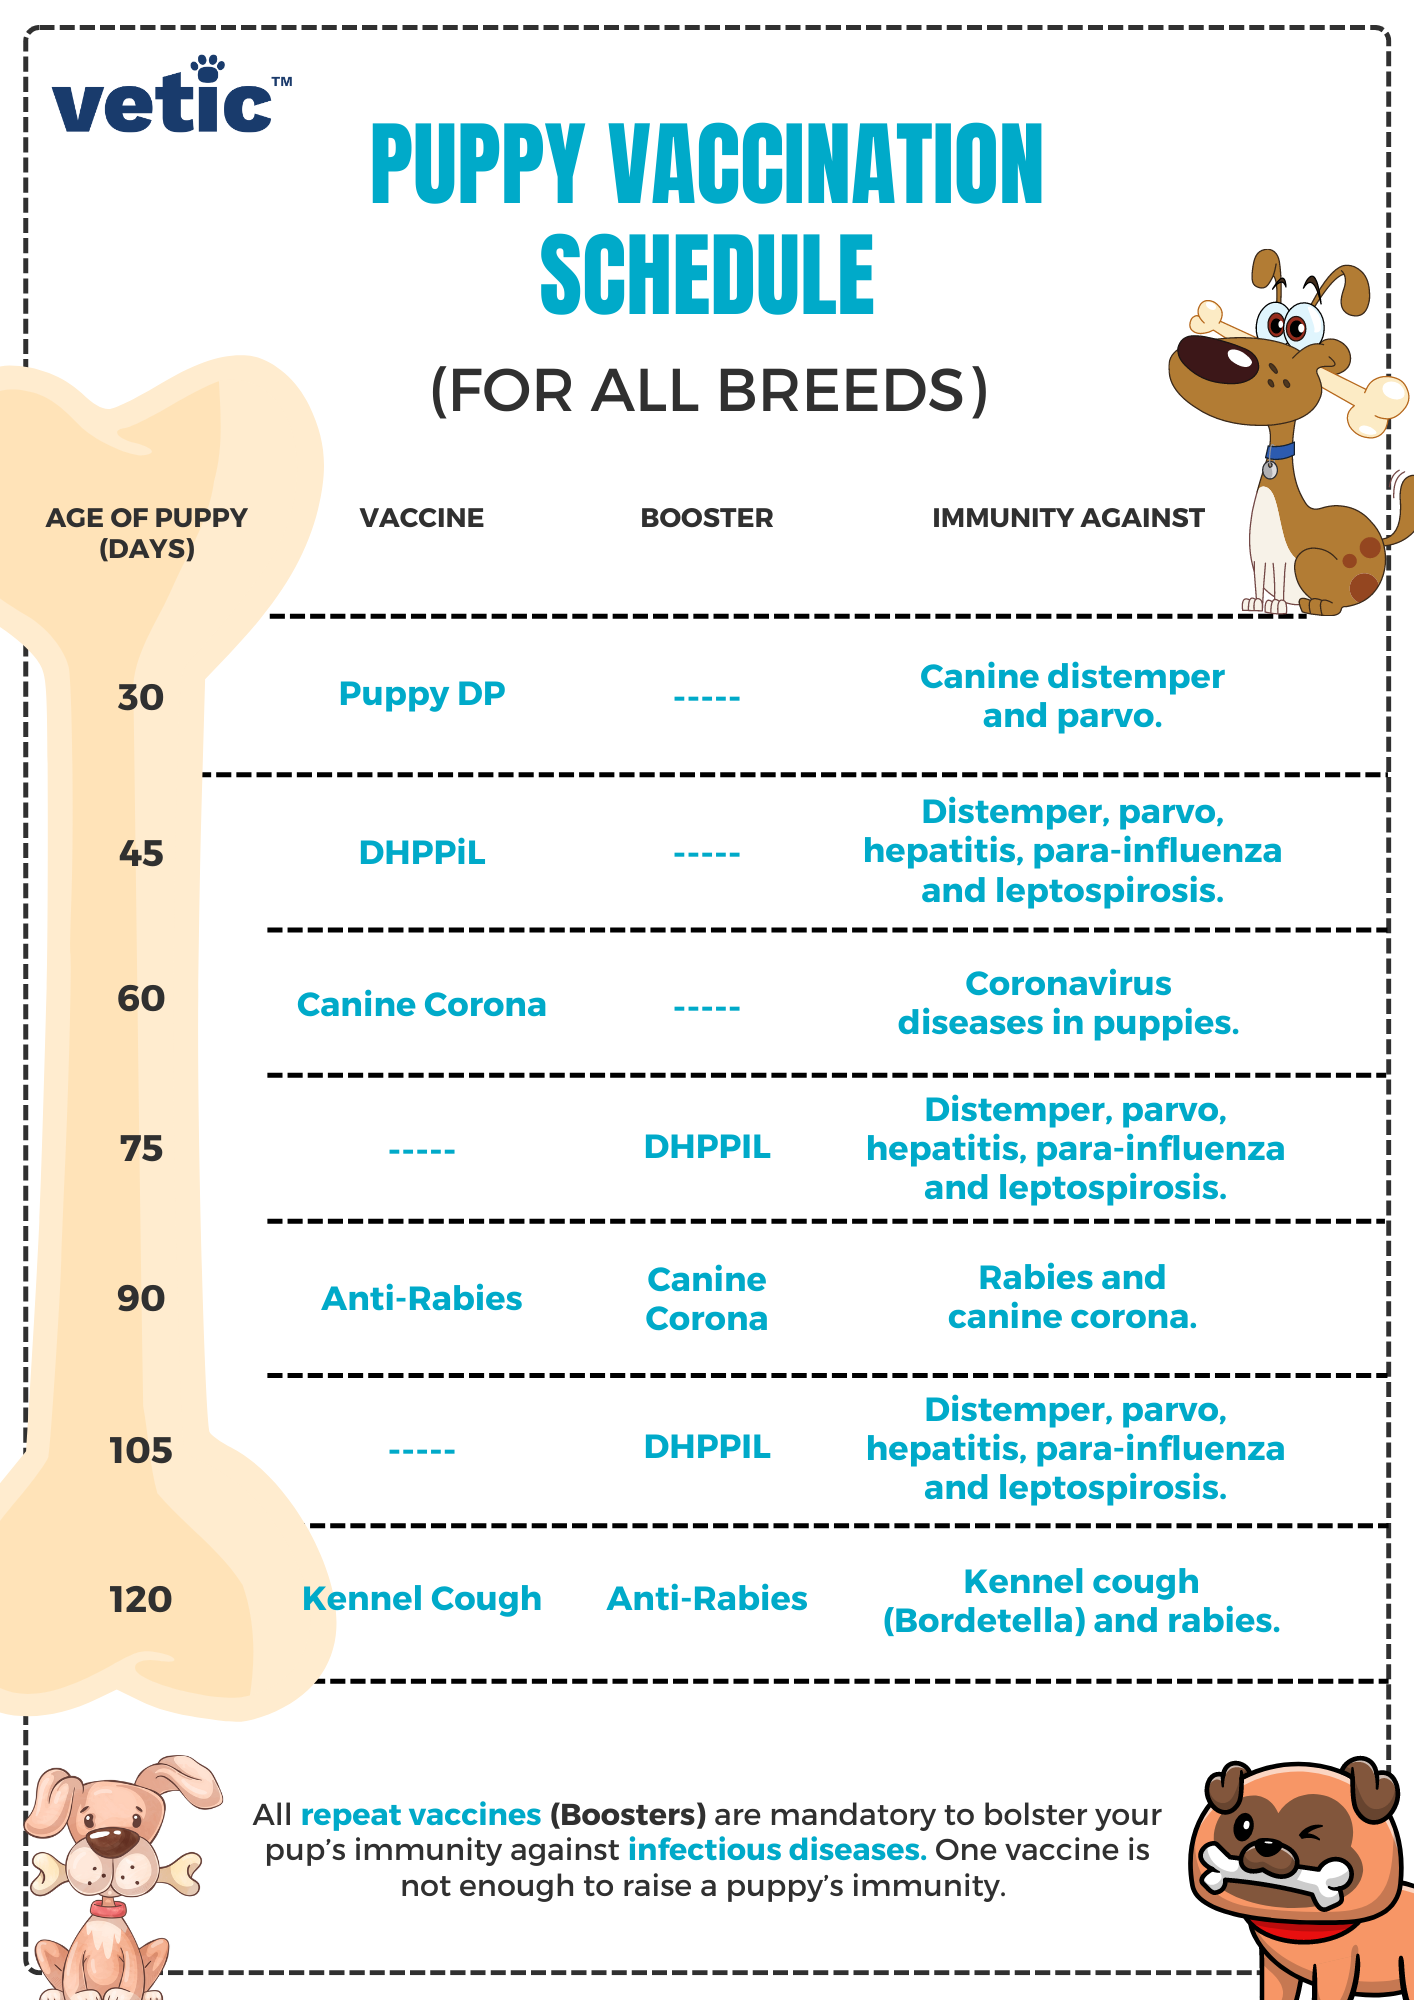 Schedule for Mandatory Vaccines for Dogs and Puppies in India